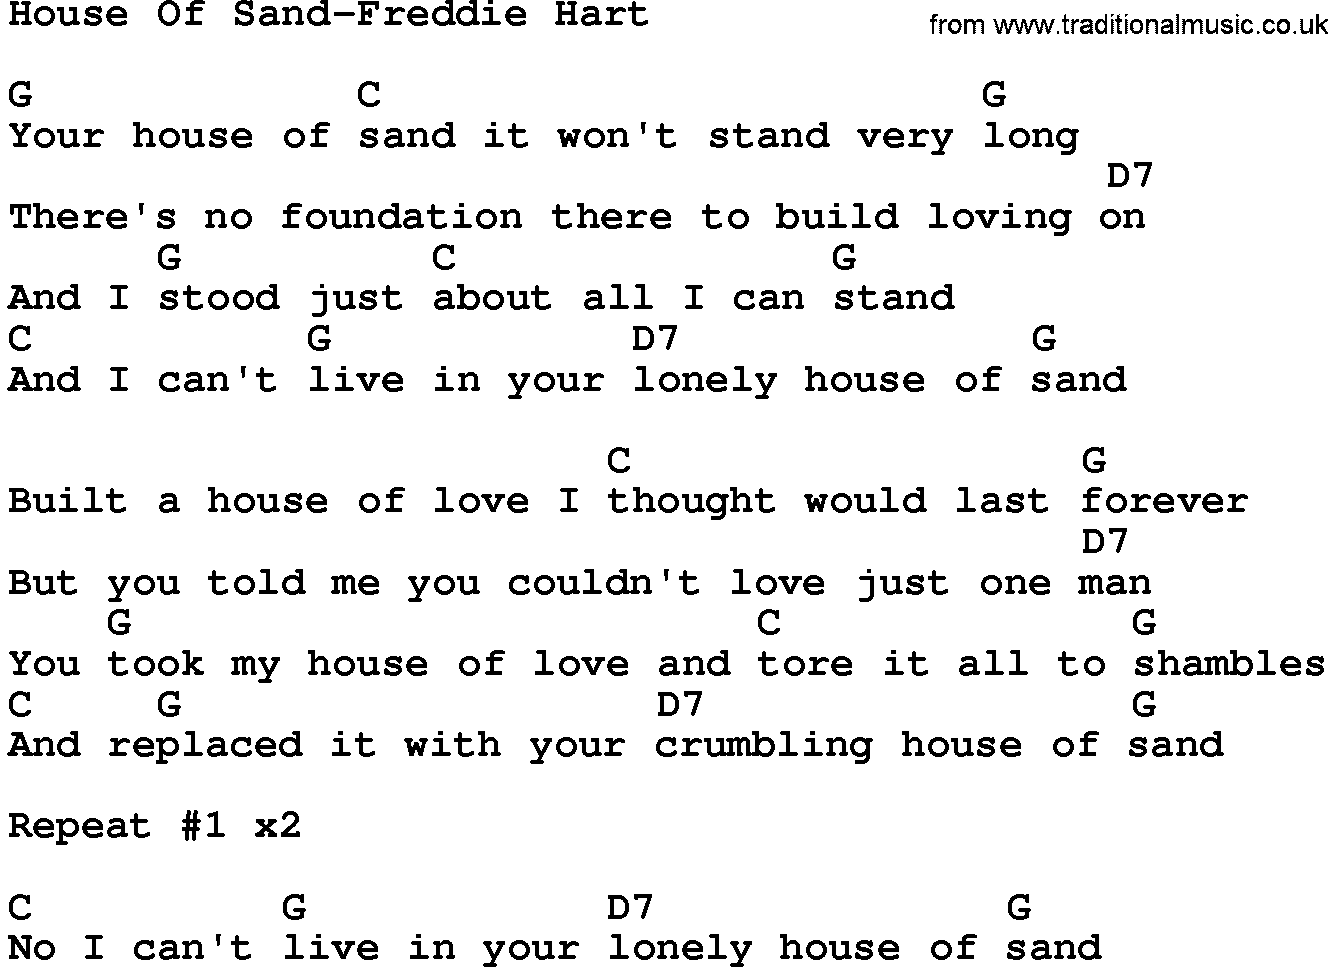 Country music song: House Of Sand-Freddie Hart lyrics and chords